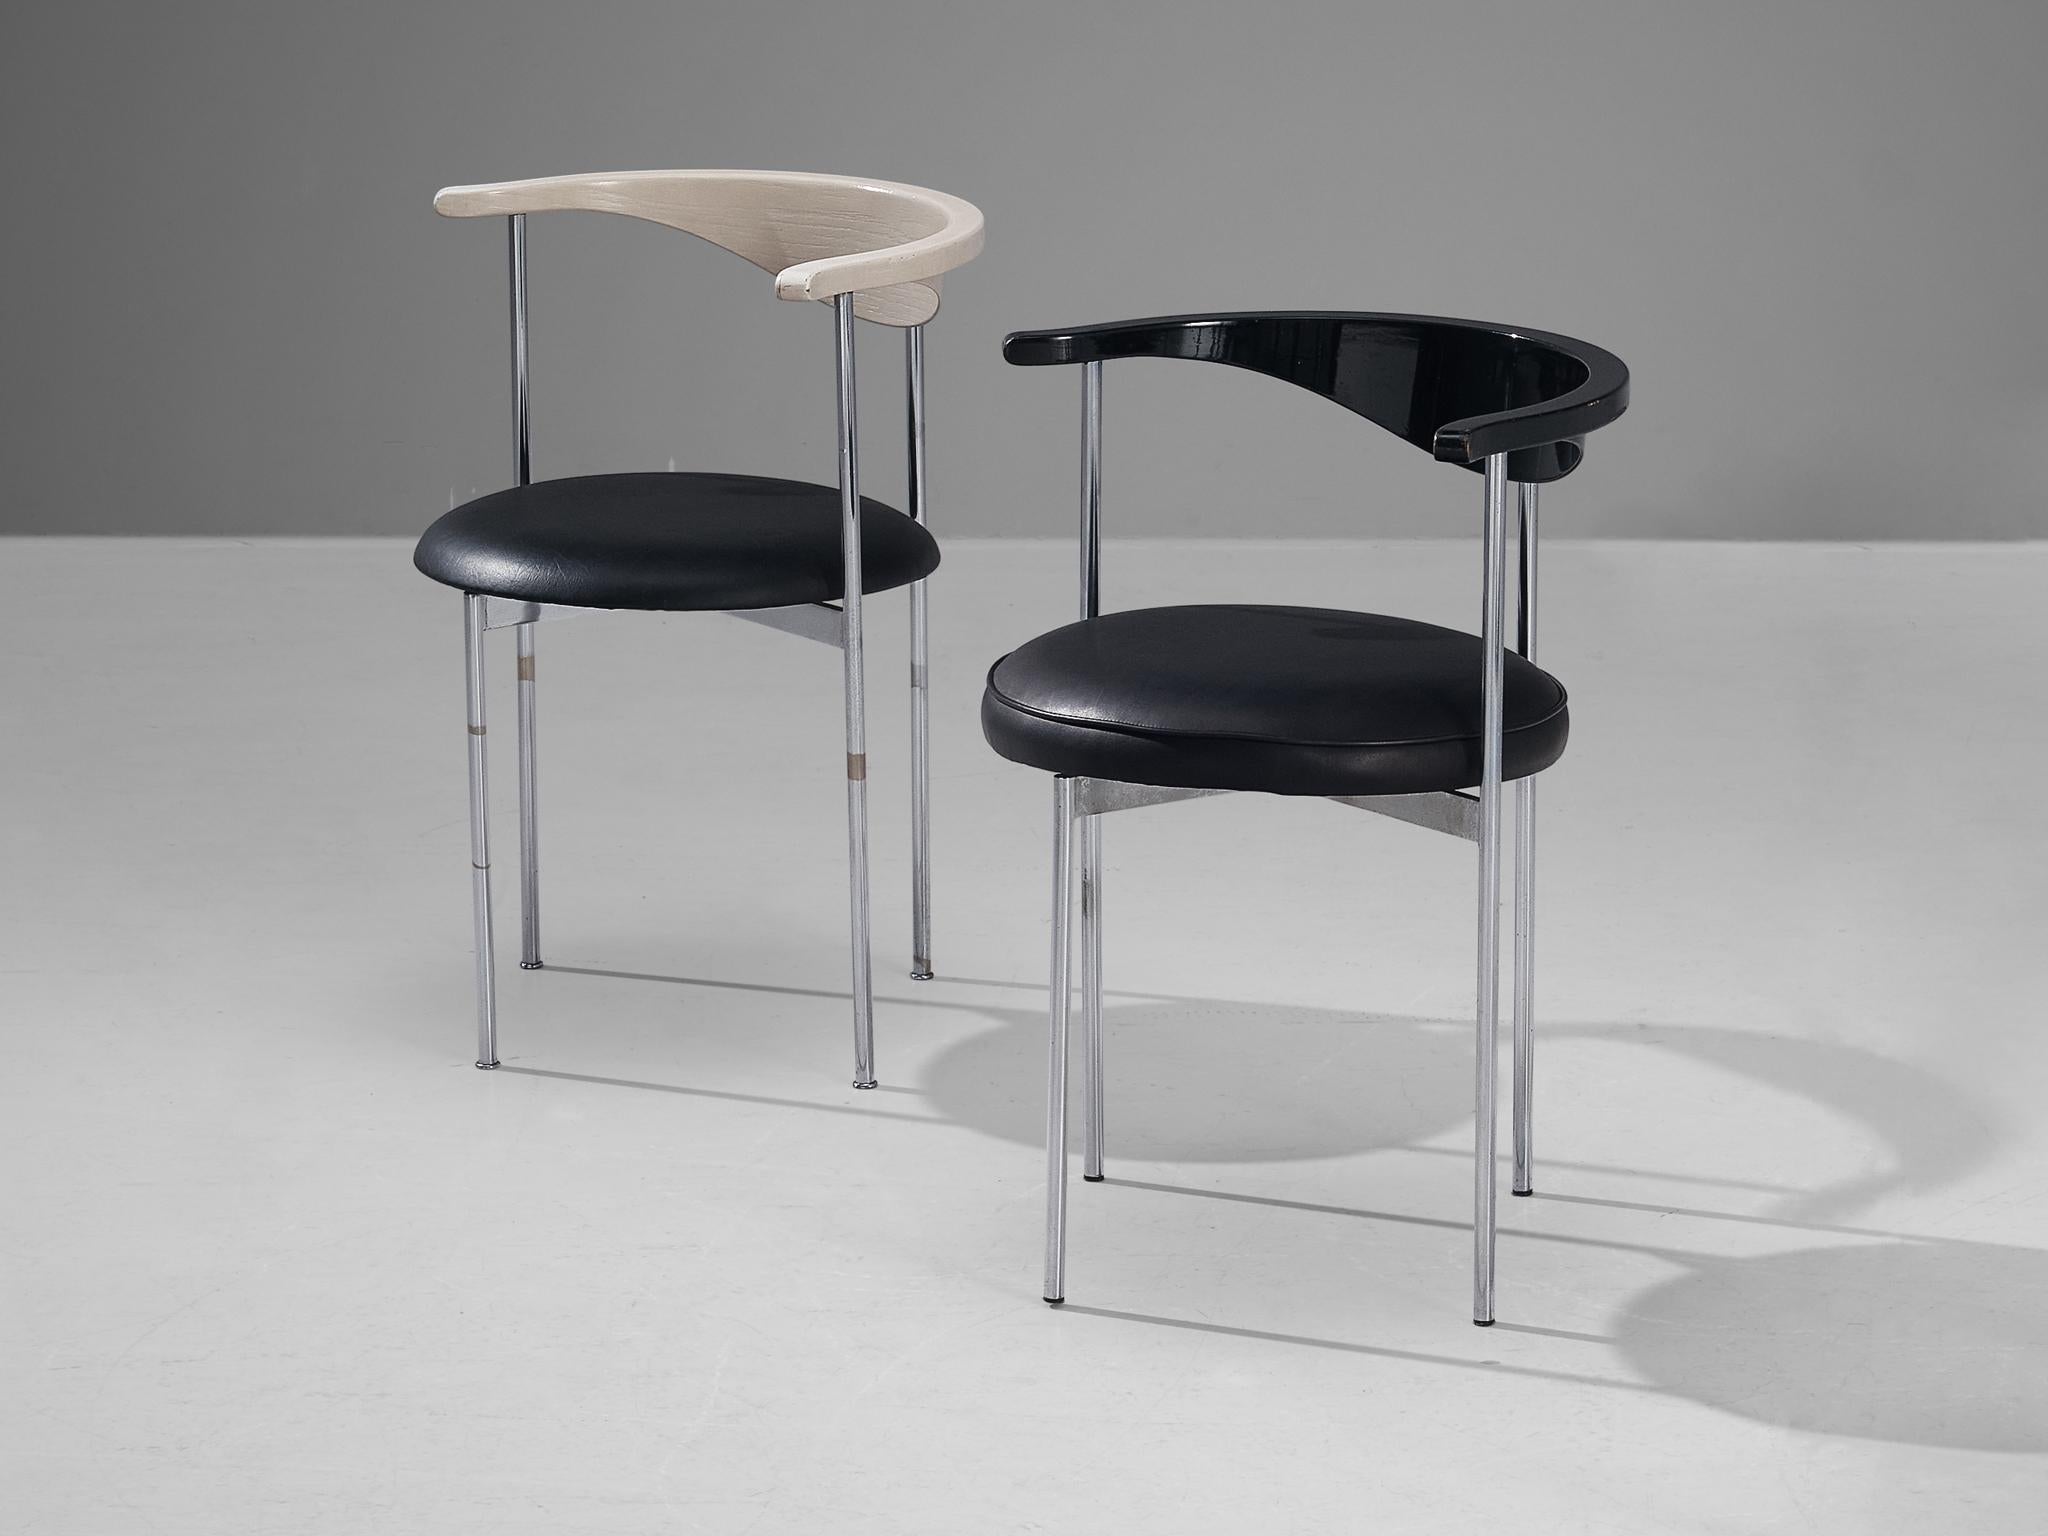 Frederik Sieck Pair of Chairs in Black and White